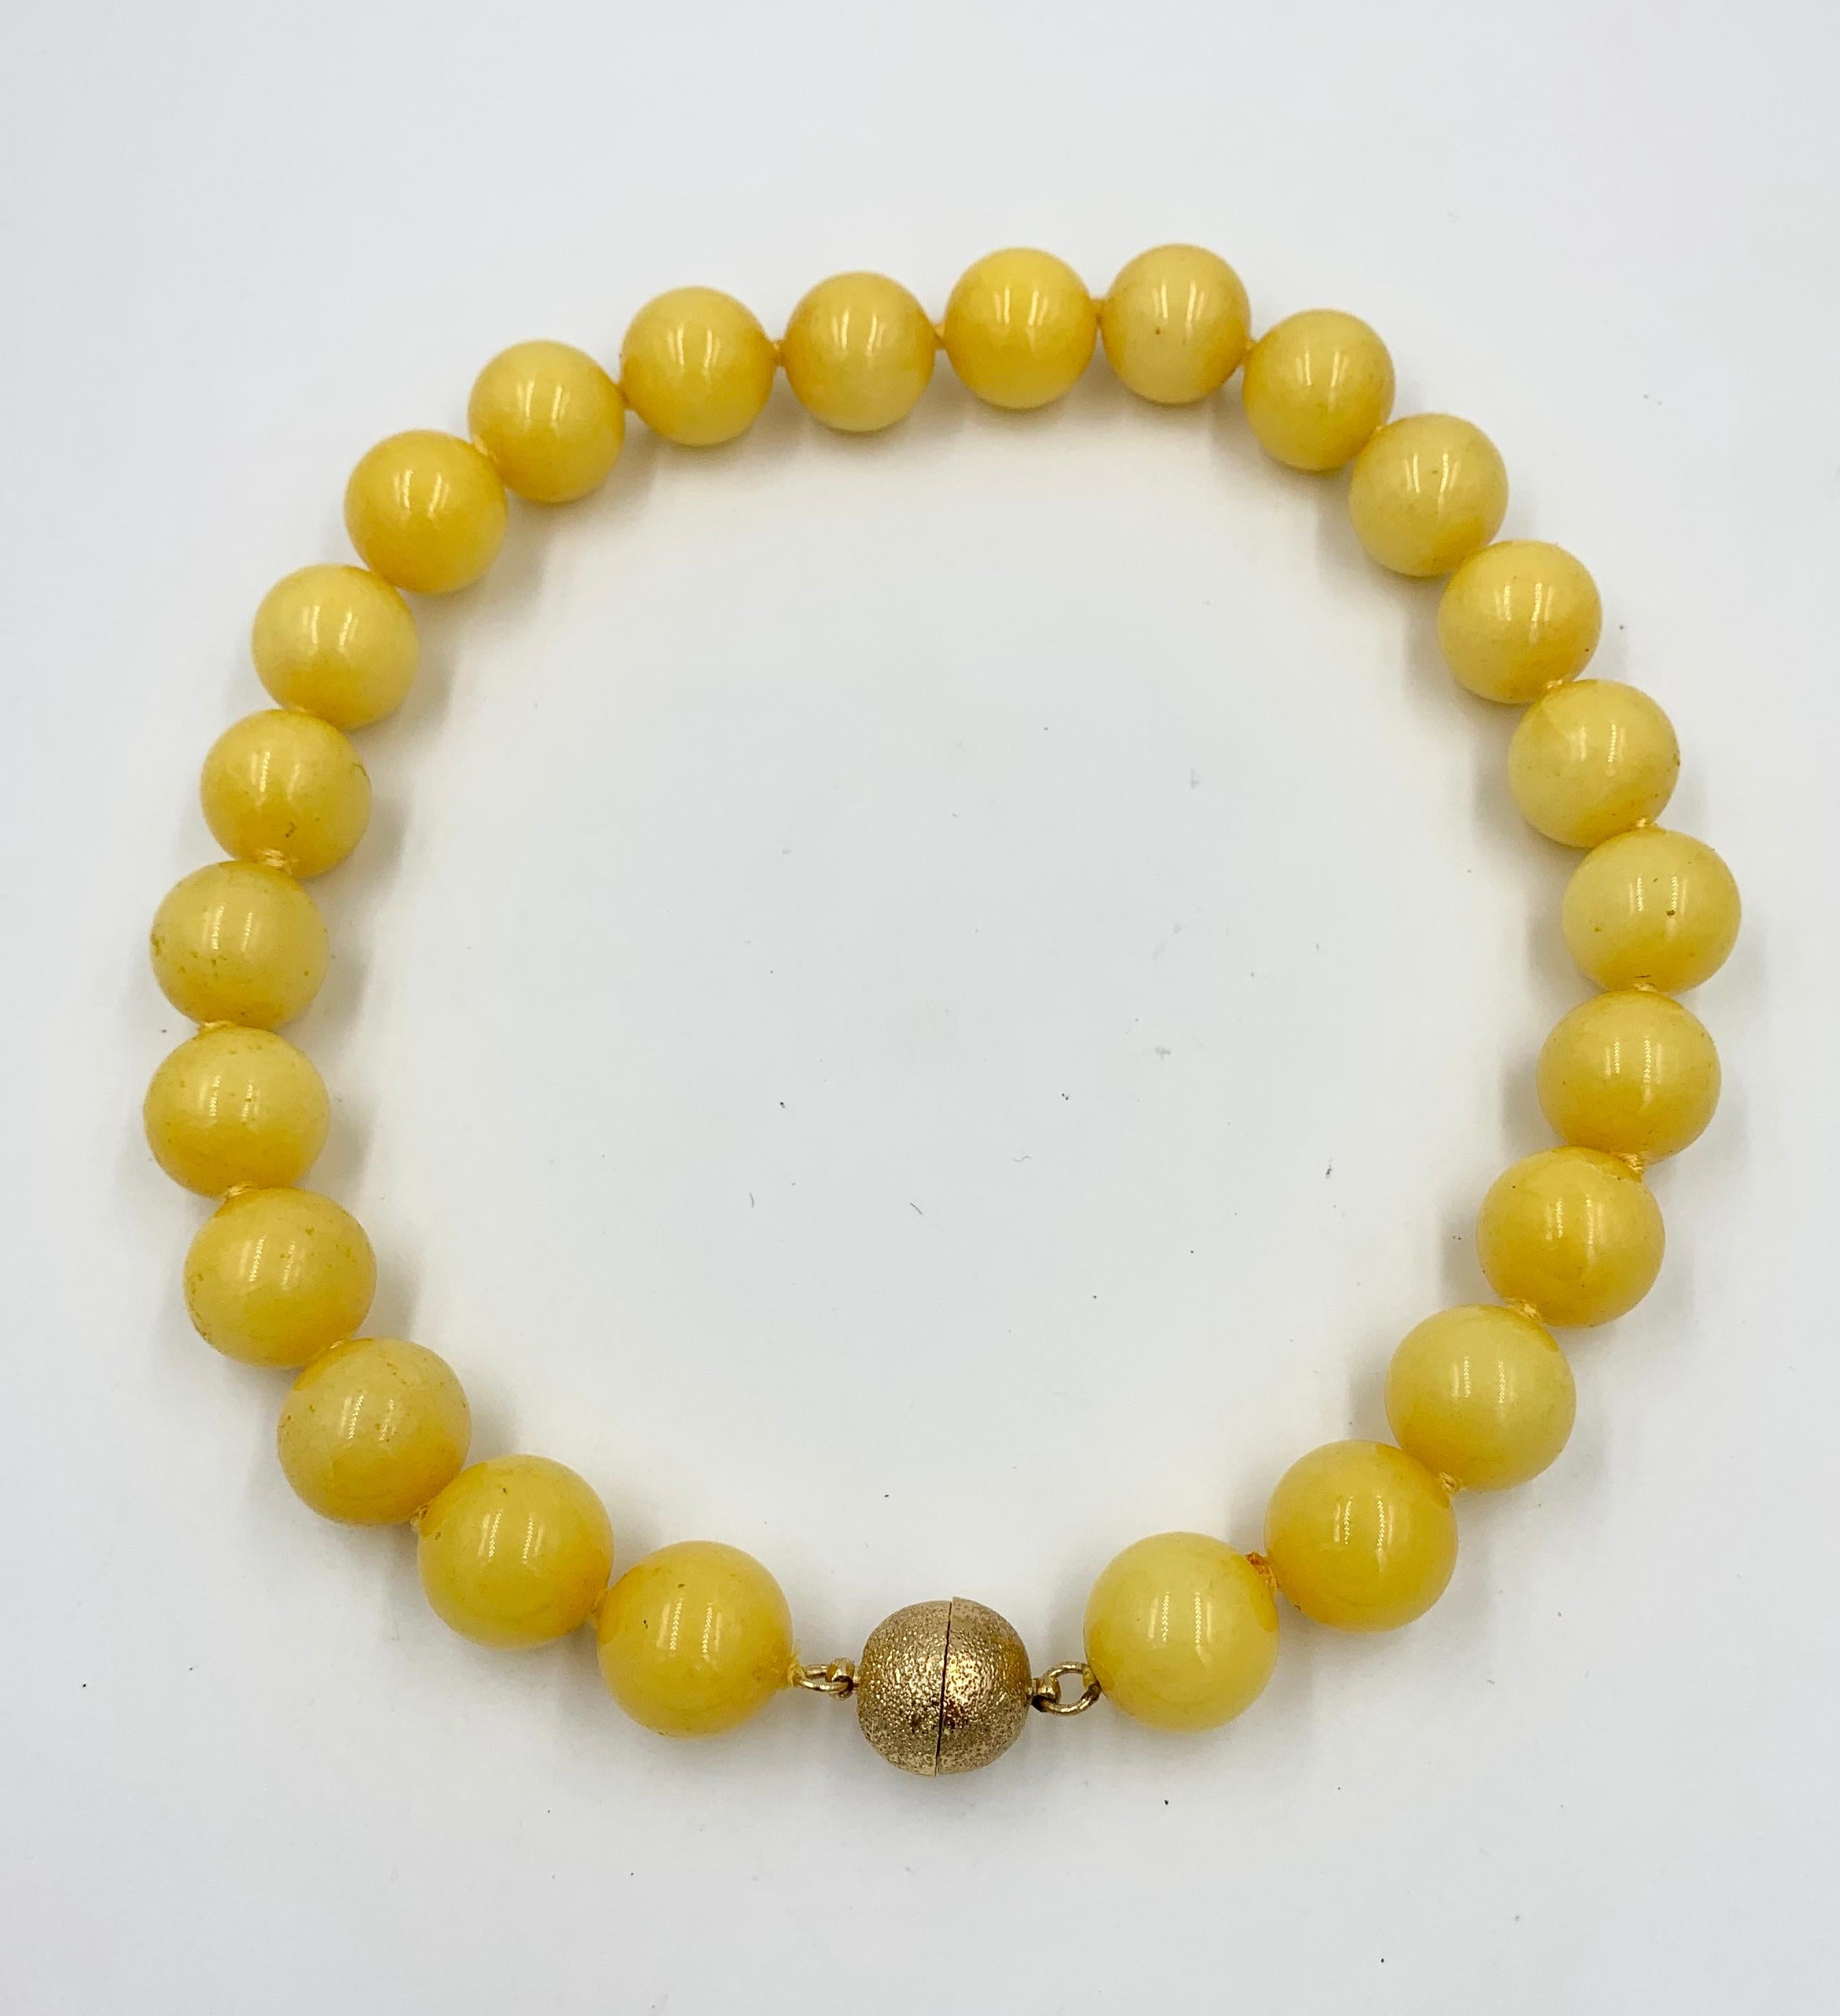 A stunning Yellow Chalcedony Bead Necklace with 20 mm (3/4 inch) wide Chalcedony beads.  The dramatic statement necklace with the large beads in vivid yellow is just fabulous.  The necklace is 19.5 inches long and it has a gold filled magnetic ball